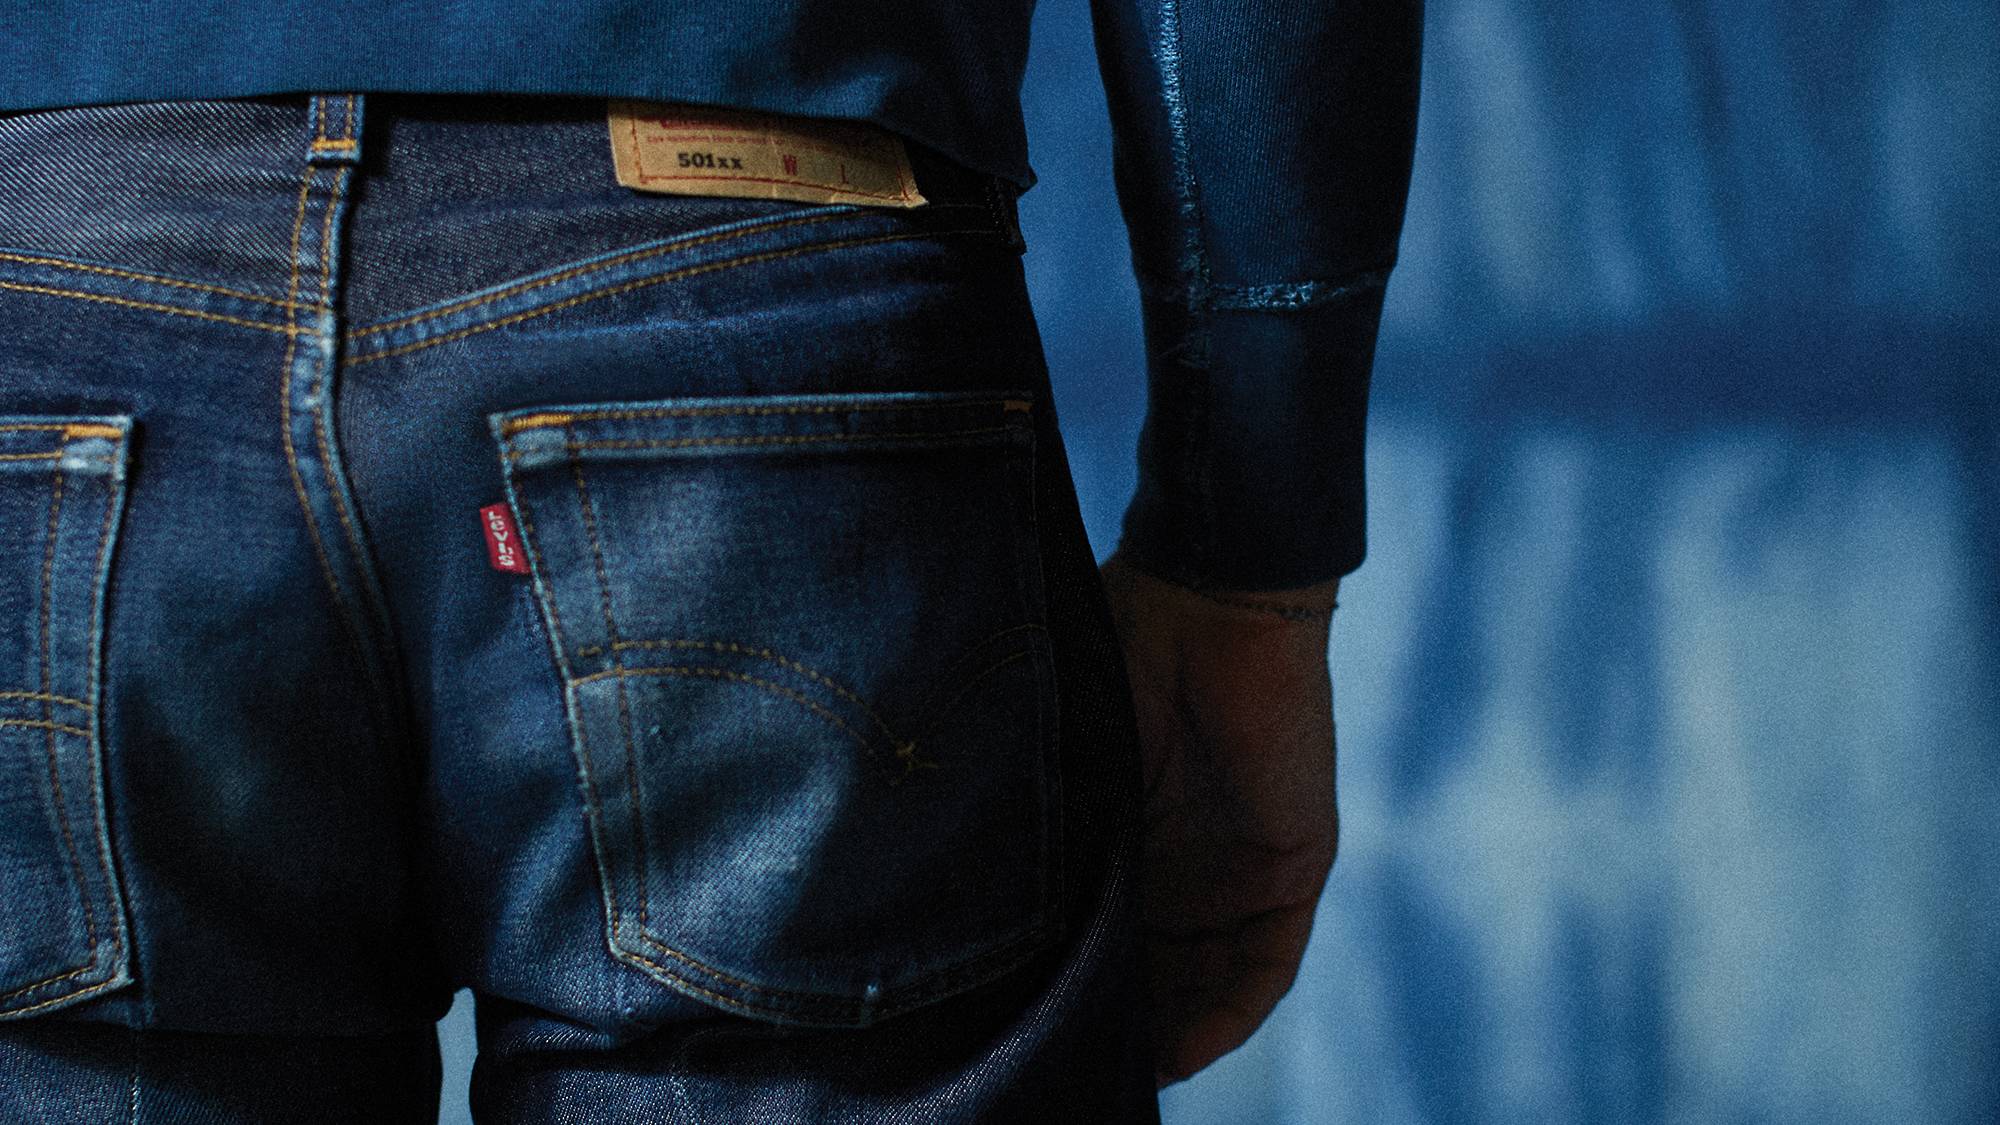 Ultimate Buying Guide To Levis Jeans (501, 502, 511, 541, 510